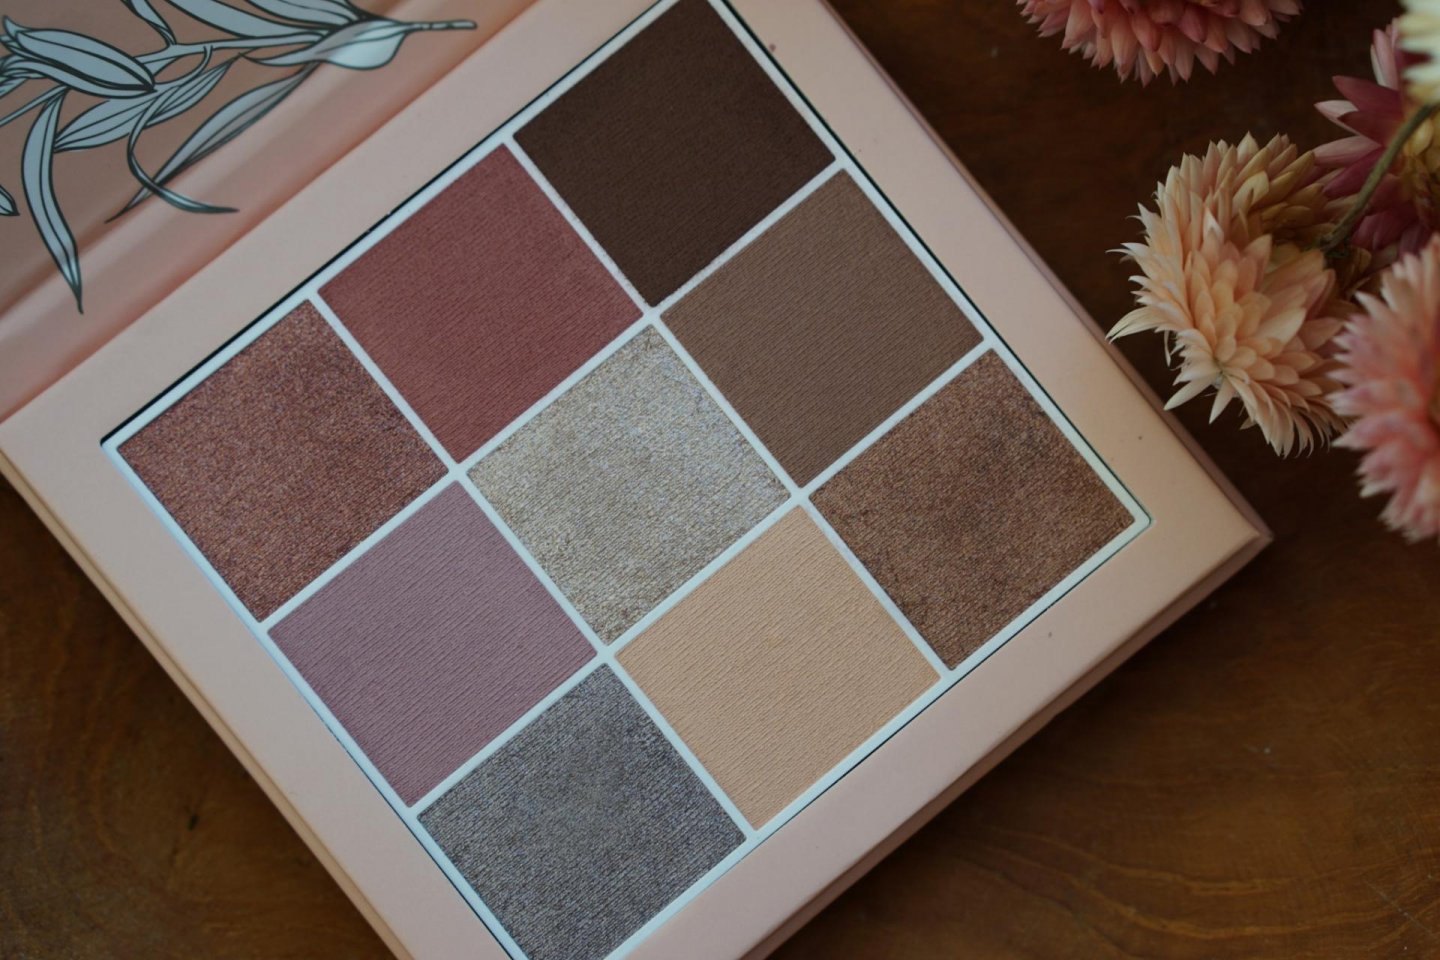 Astra Pure Beauty eyes palette